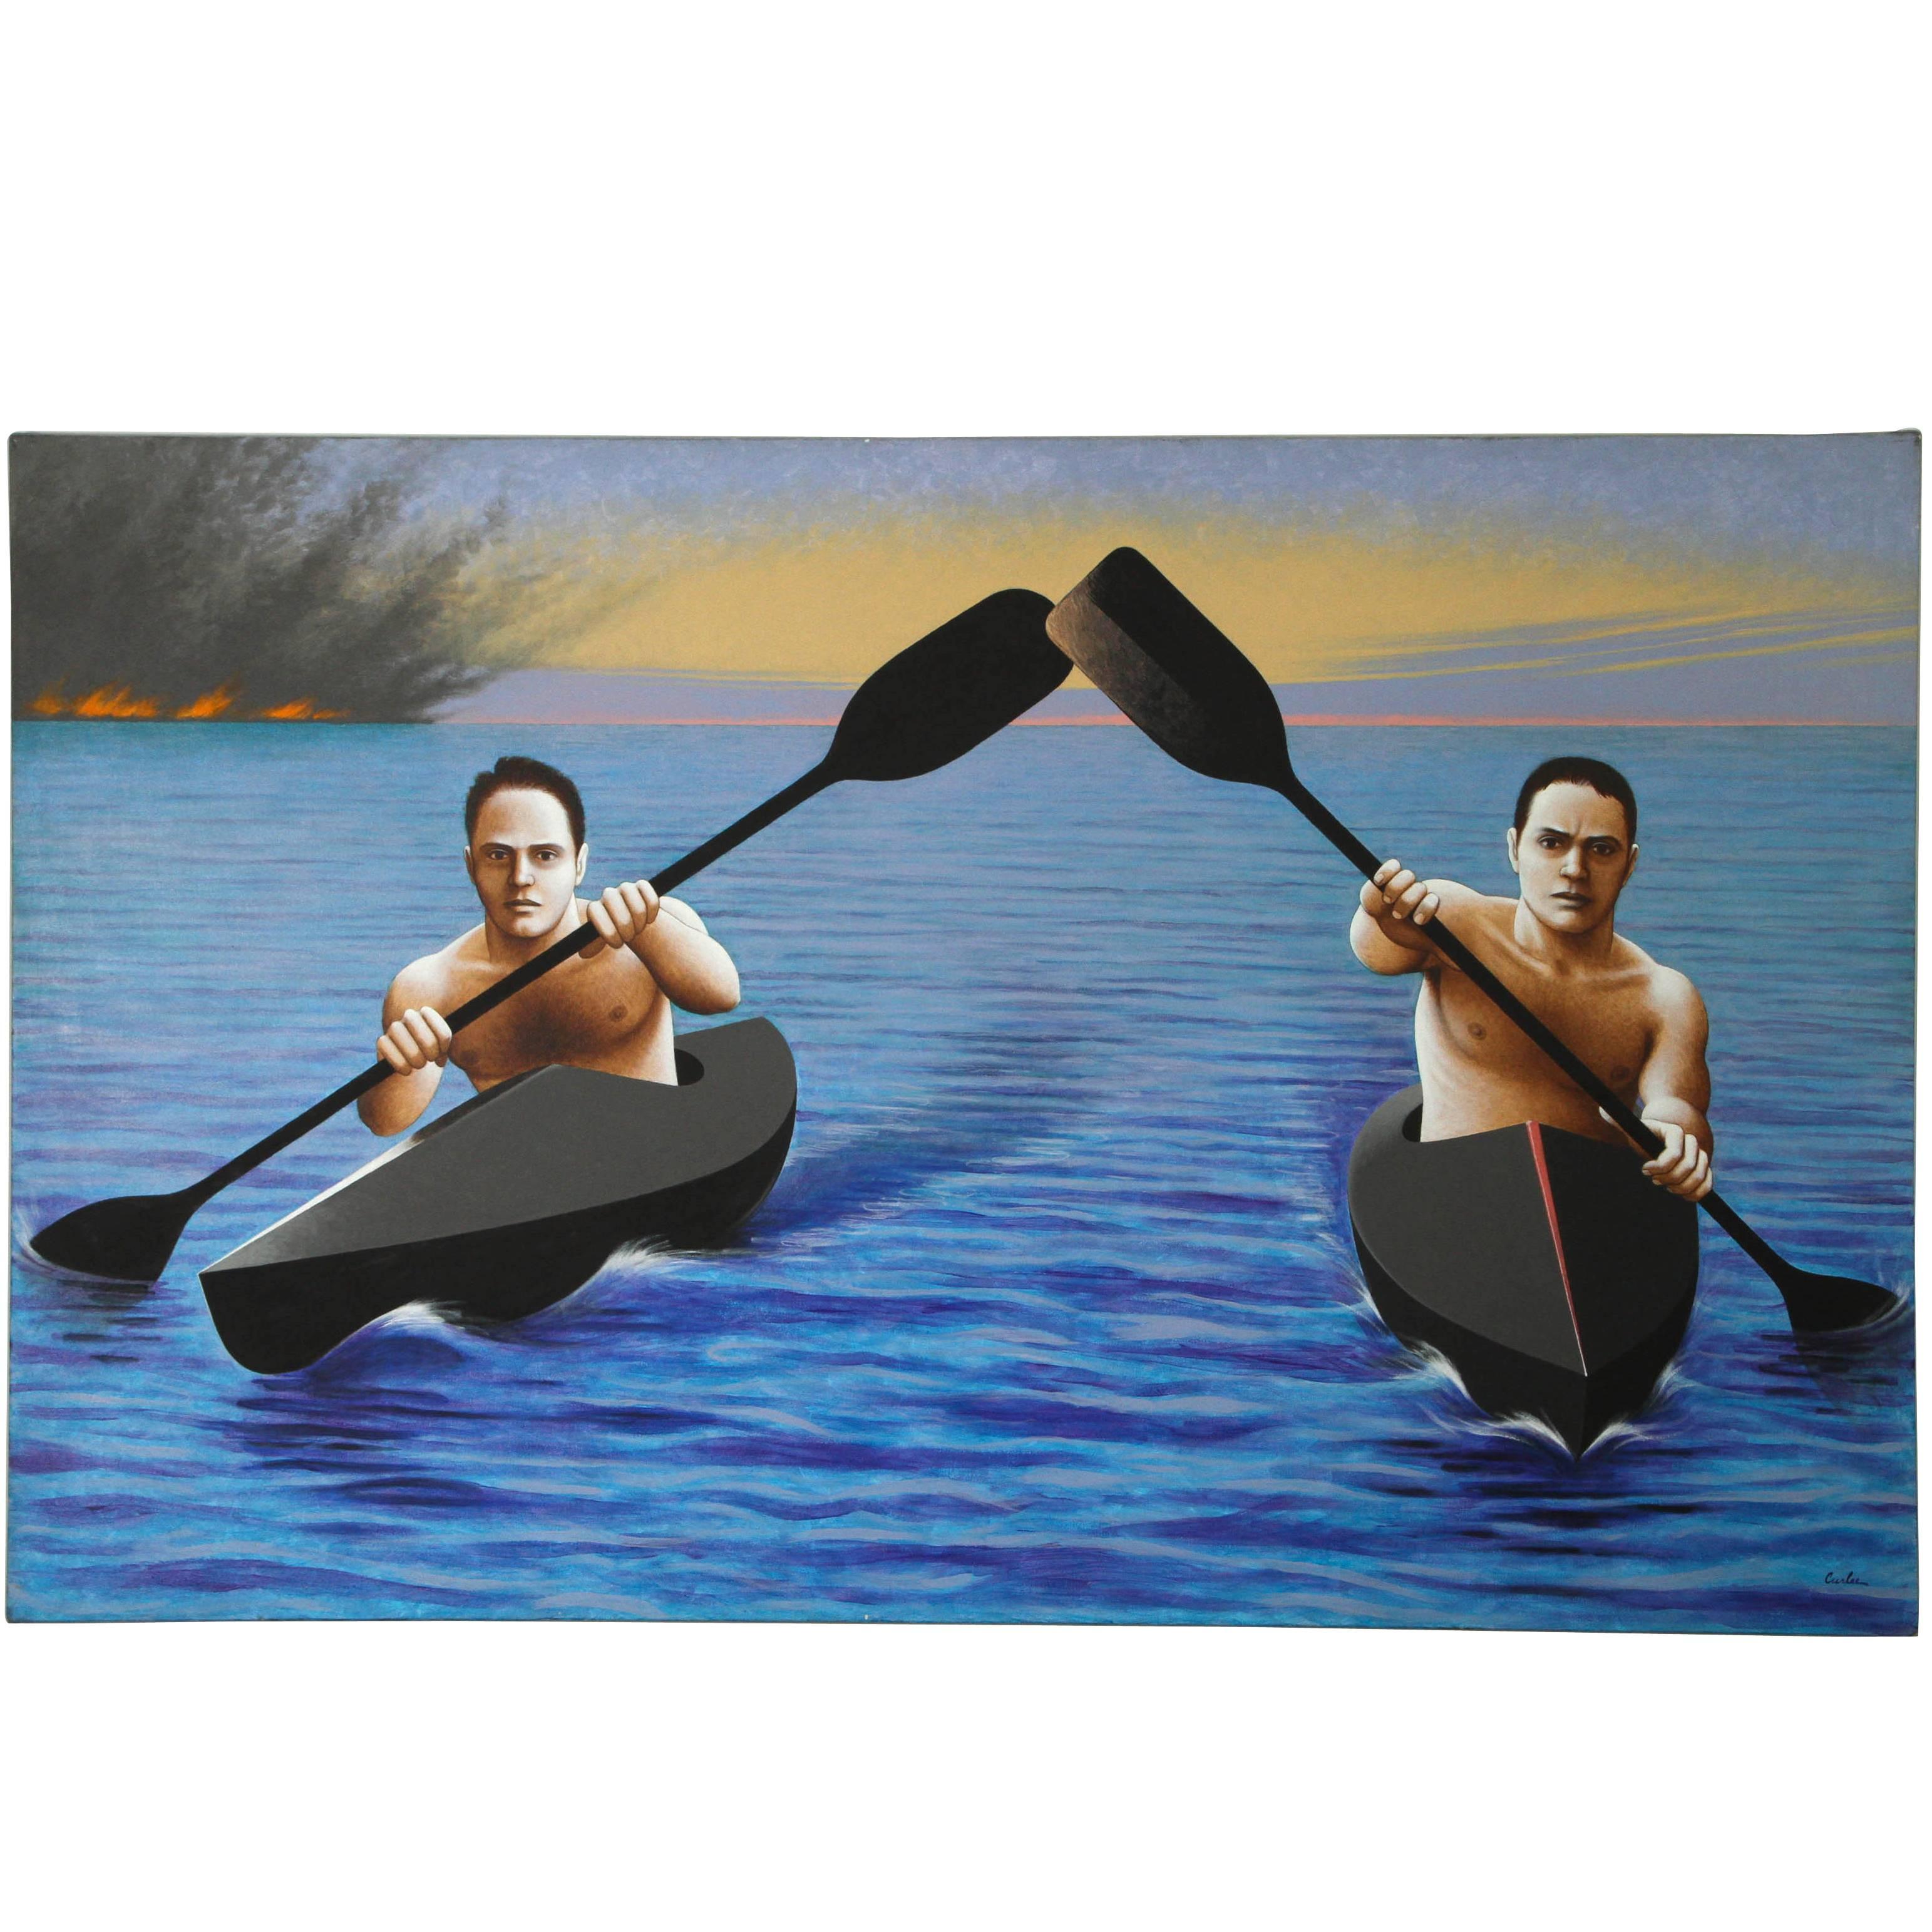 Kayakers Escaping from a Disaster, Painting by Lynn Curlee